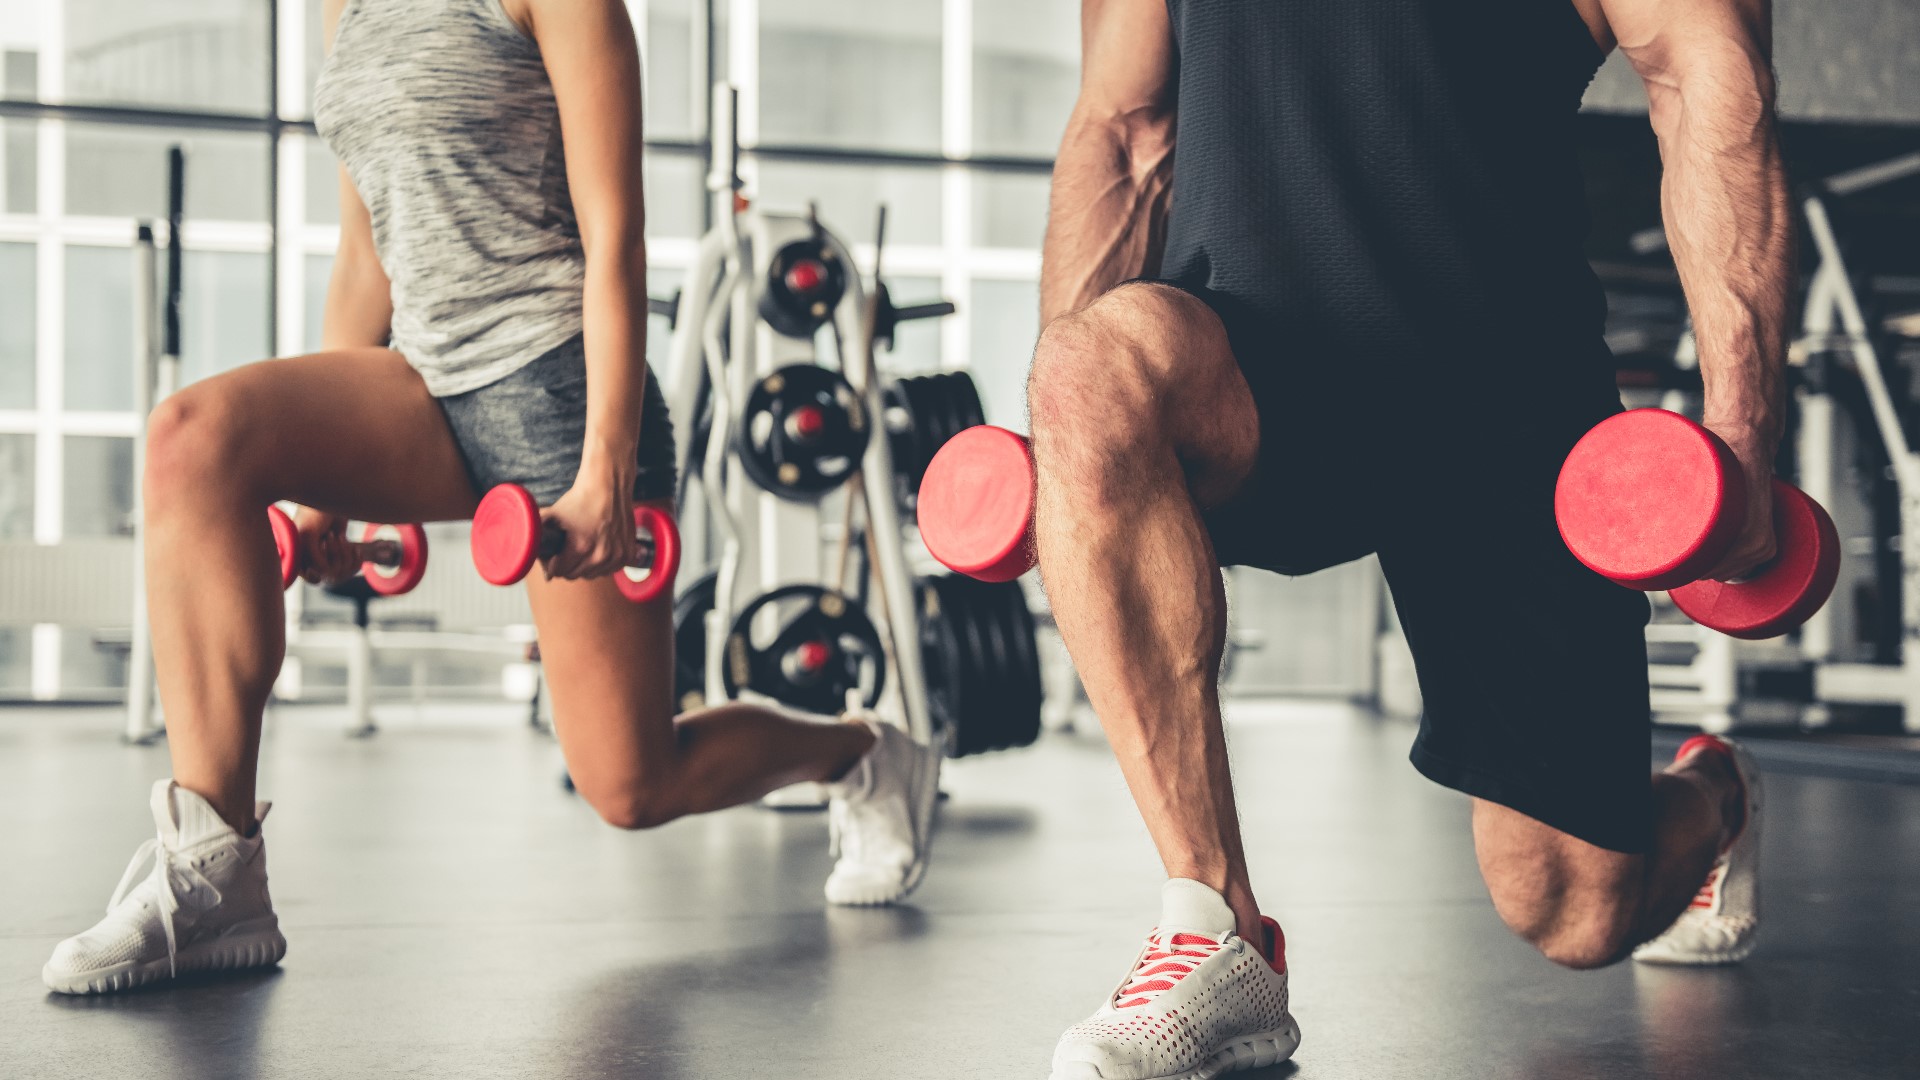 After all the chocolate, wine and delicious dinner dates -- you may be looking to work off some of the extra love you consumed on Valentine's Day.